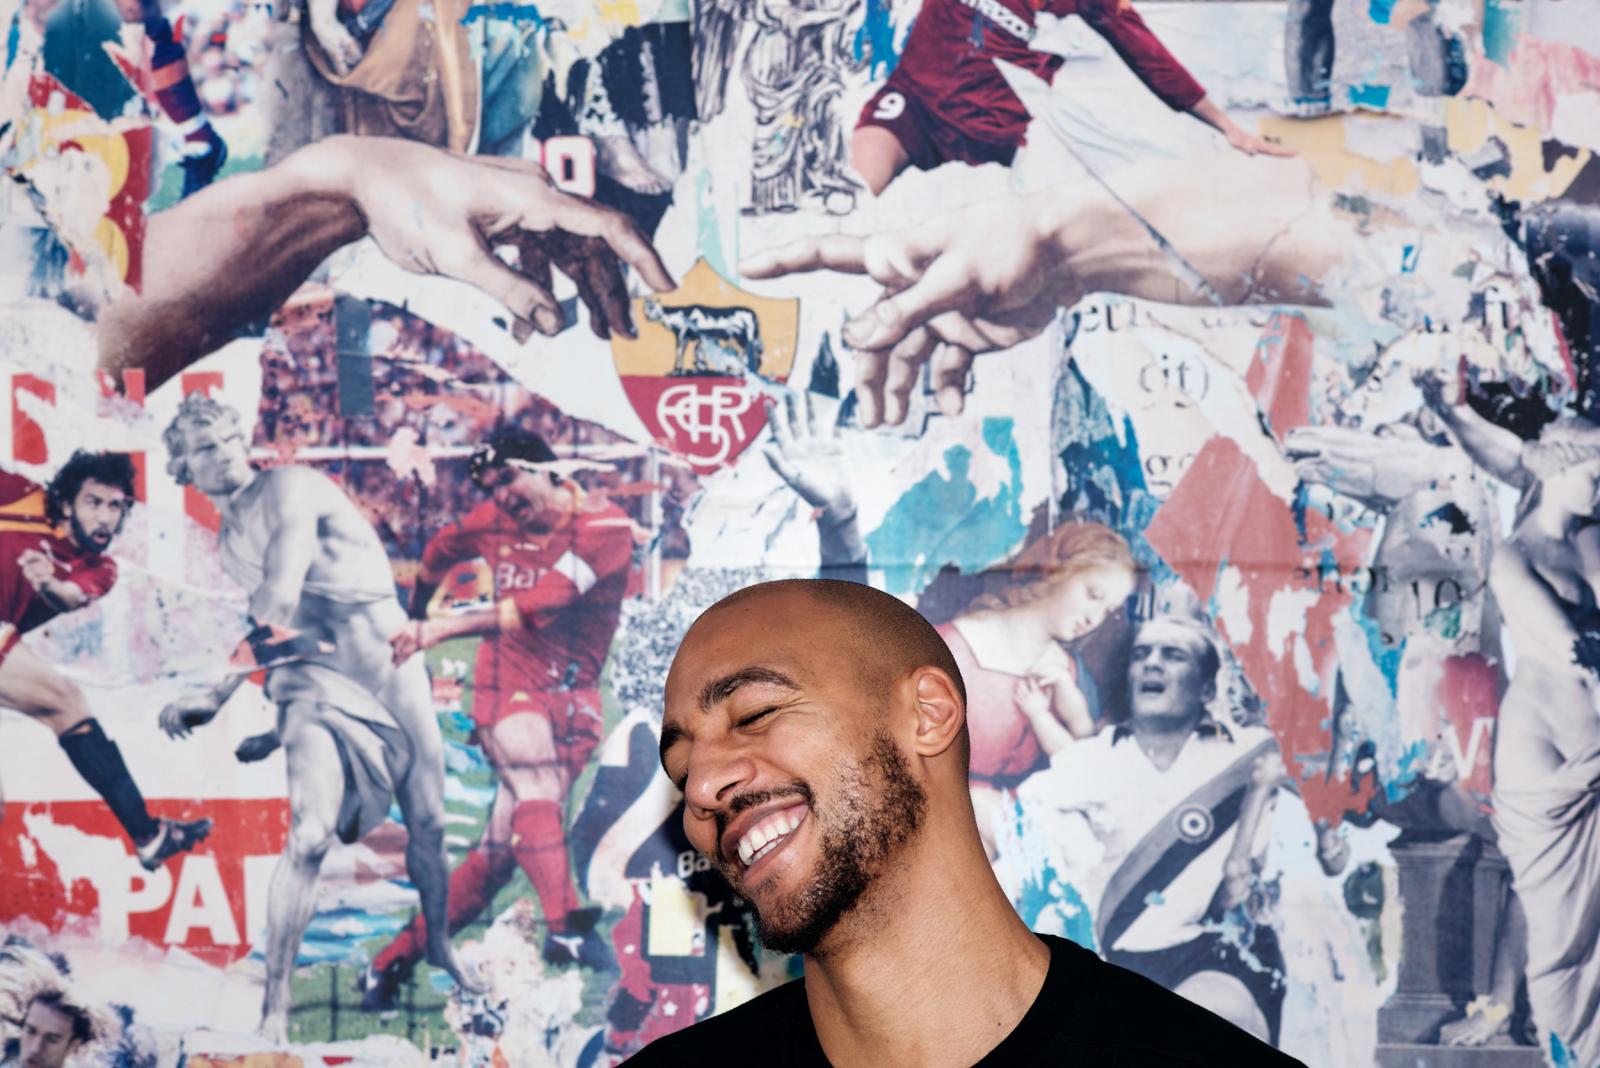 Steven Nzonzi, AS Roma Club. Commissioned by So Foot 